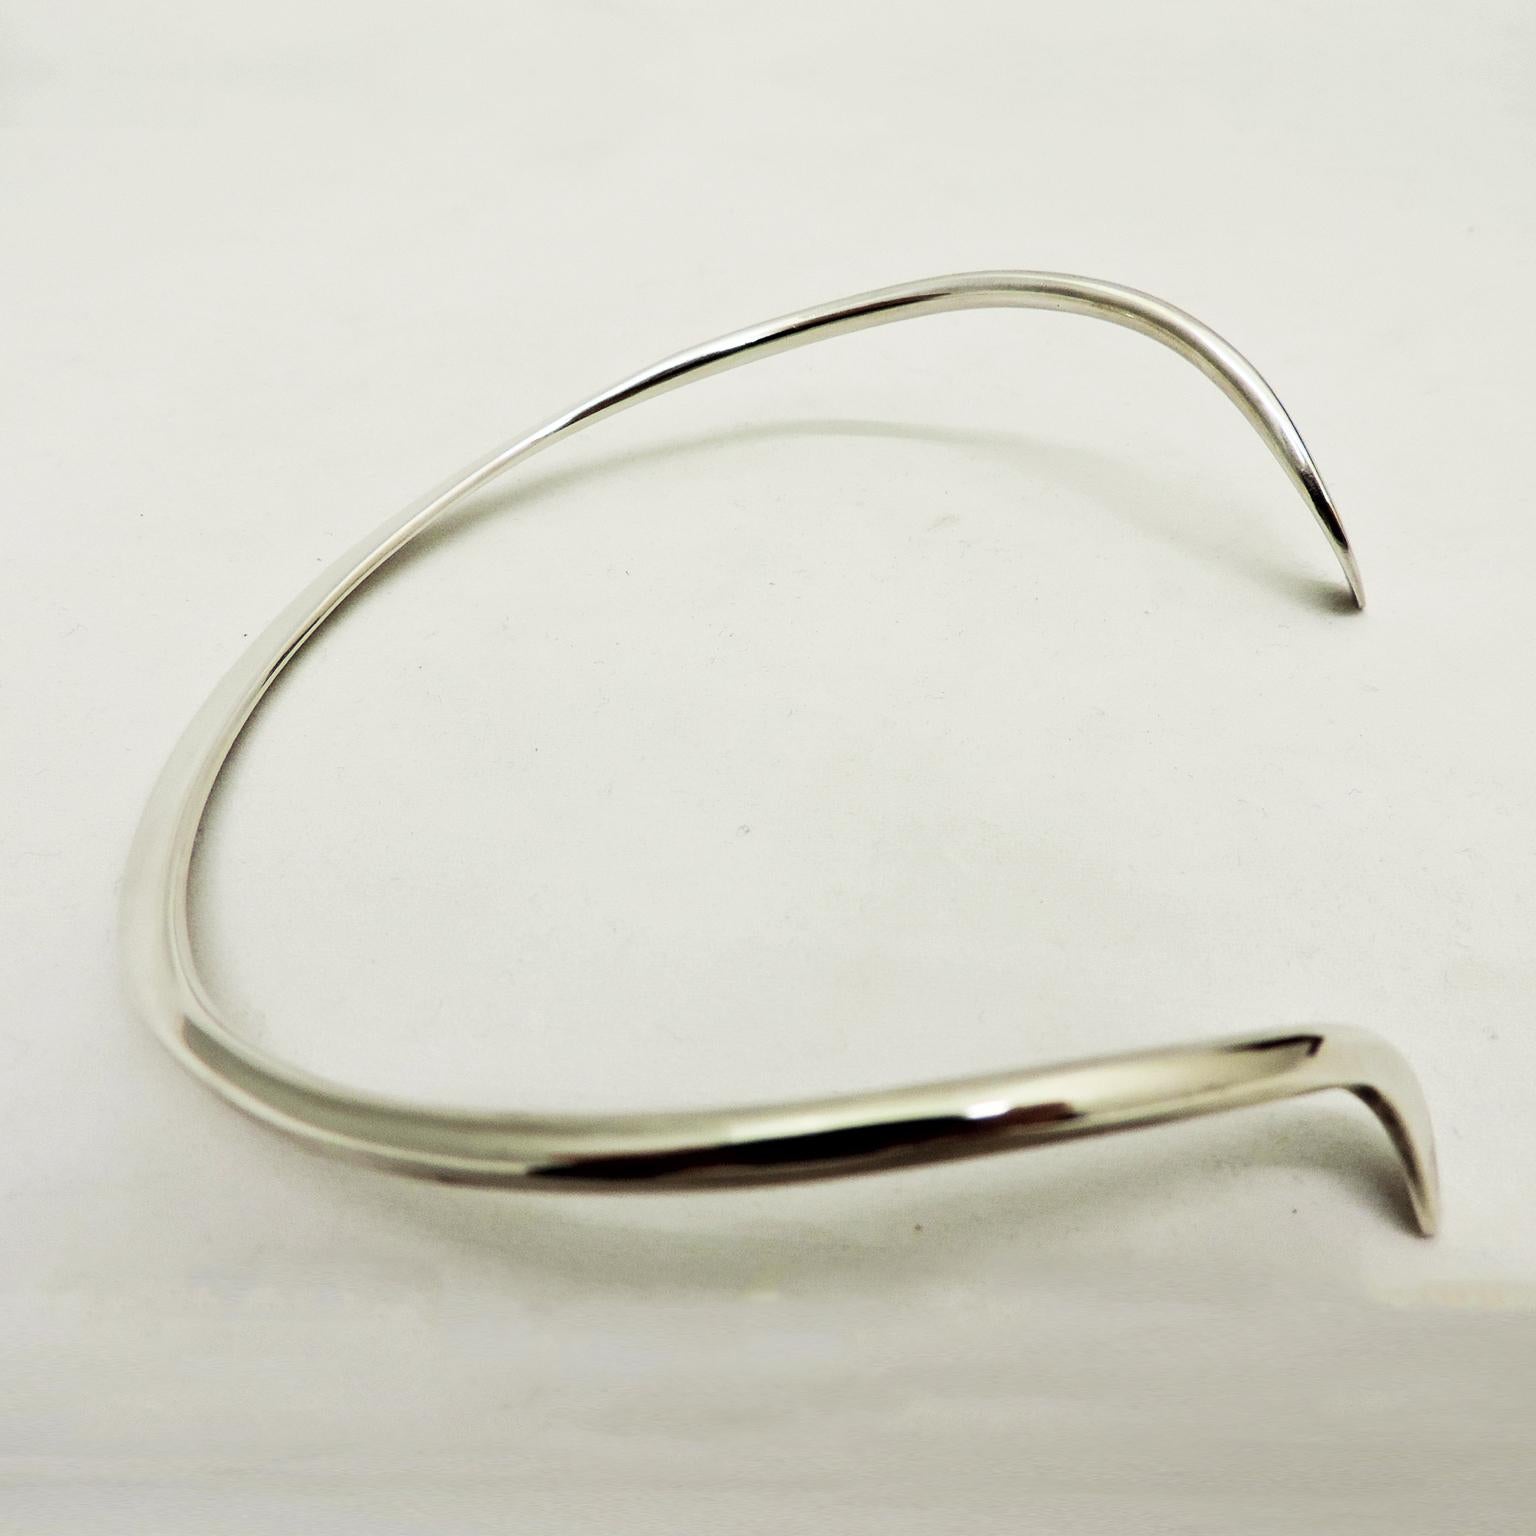 Minimalist Georg Jensen Silver Neck Ring by Ove Wendt No. A10A